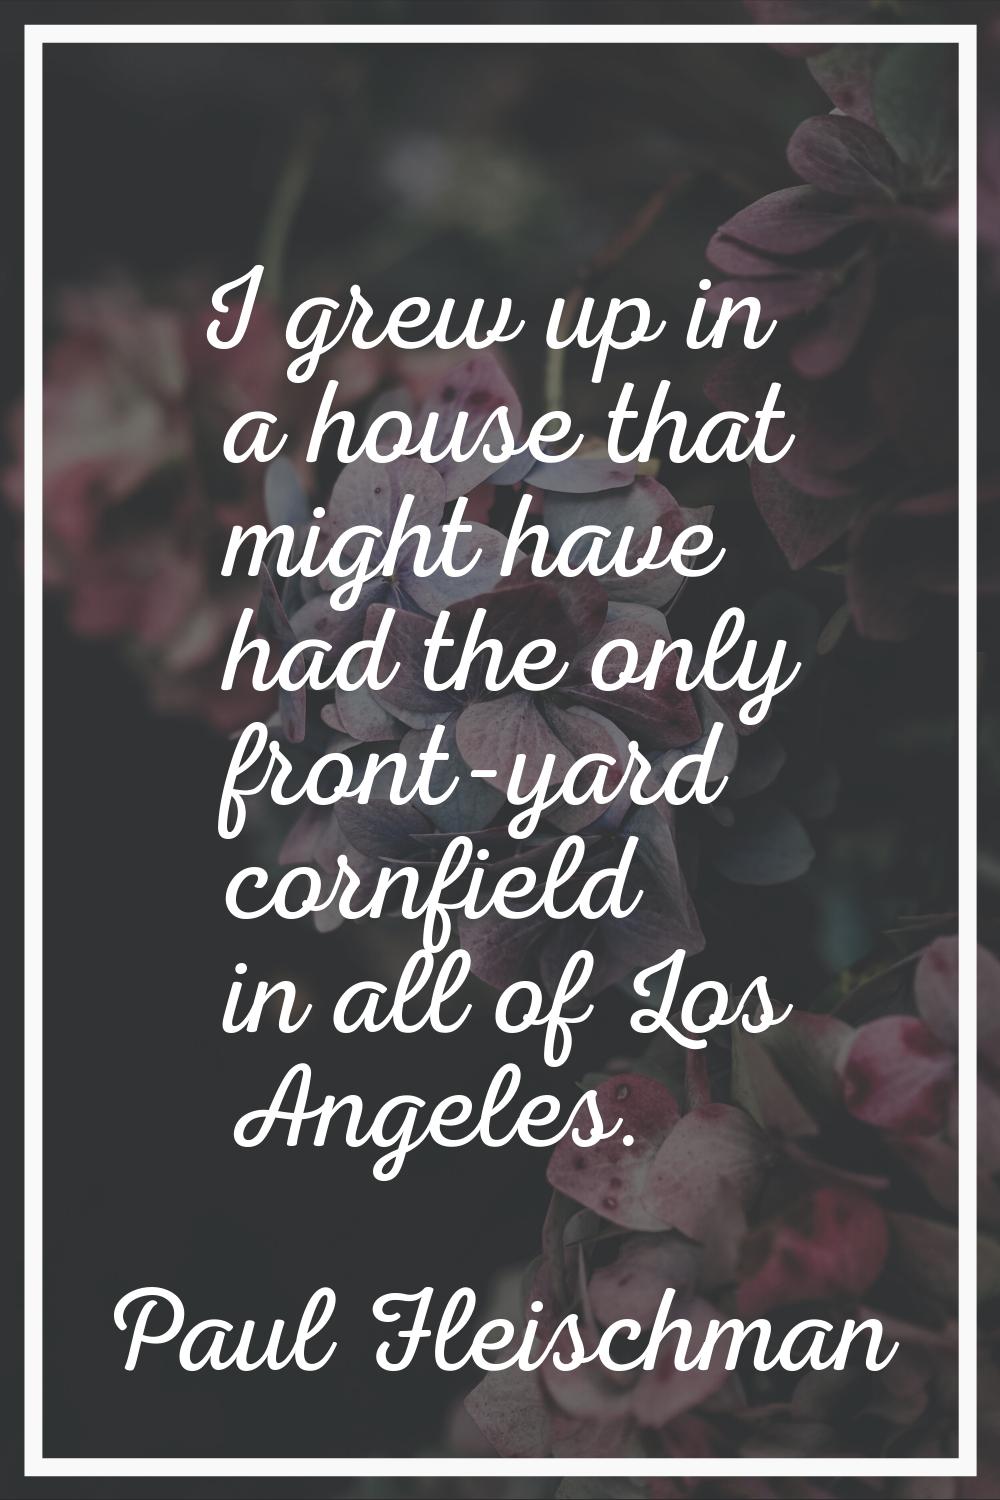 I grew up in a house that might have had the only front-yard cornfield in all of Los Angeles.